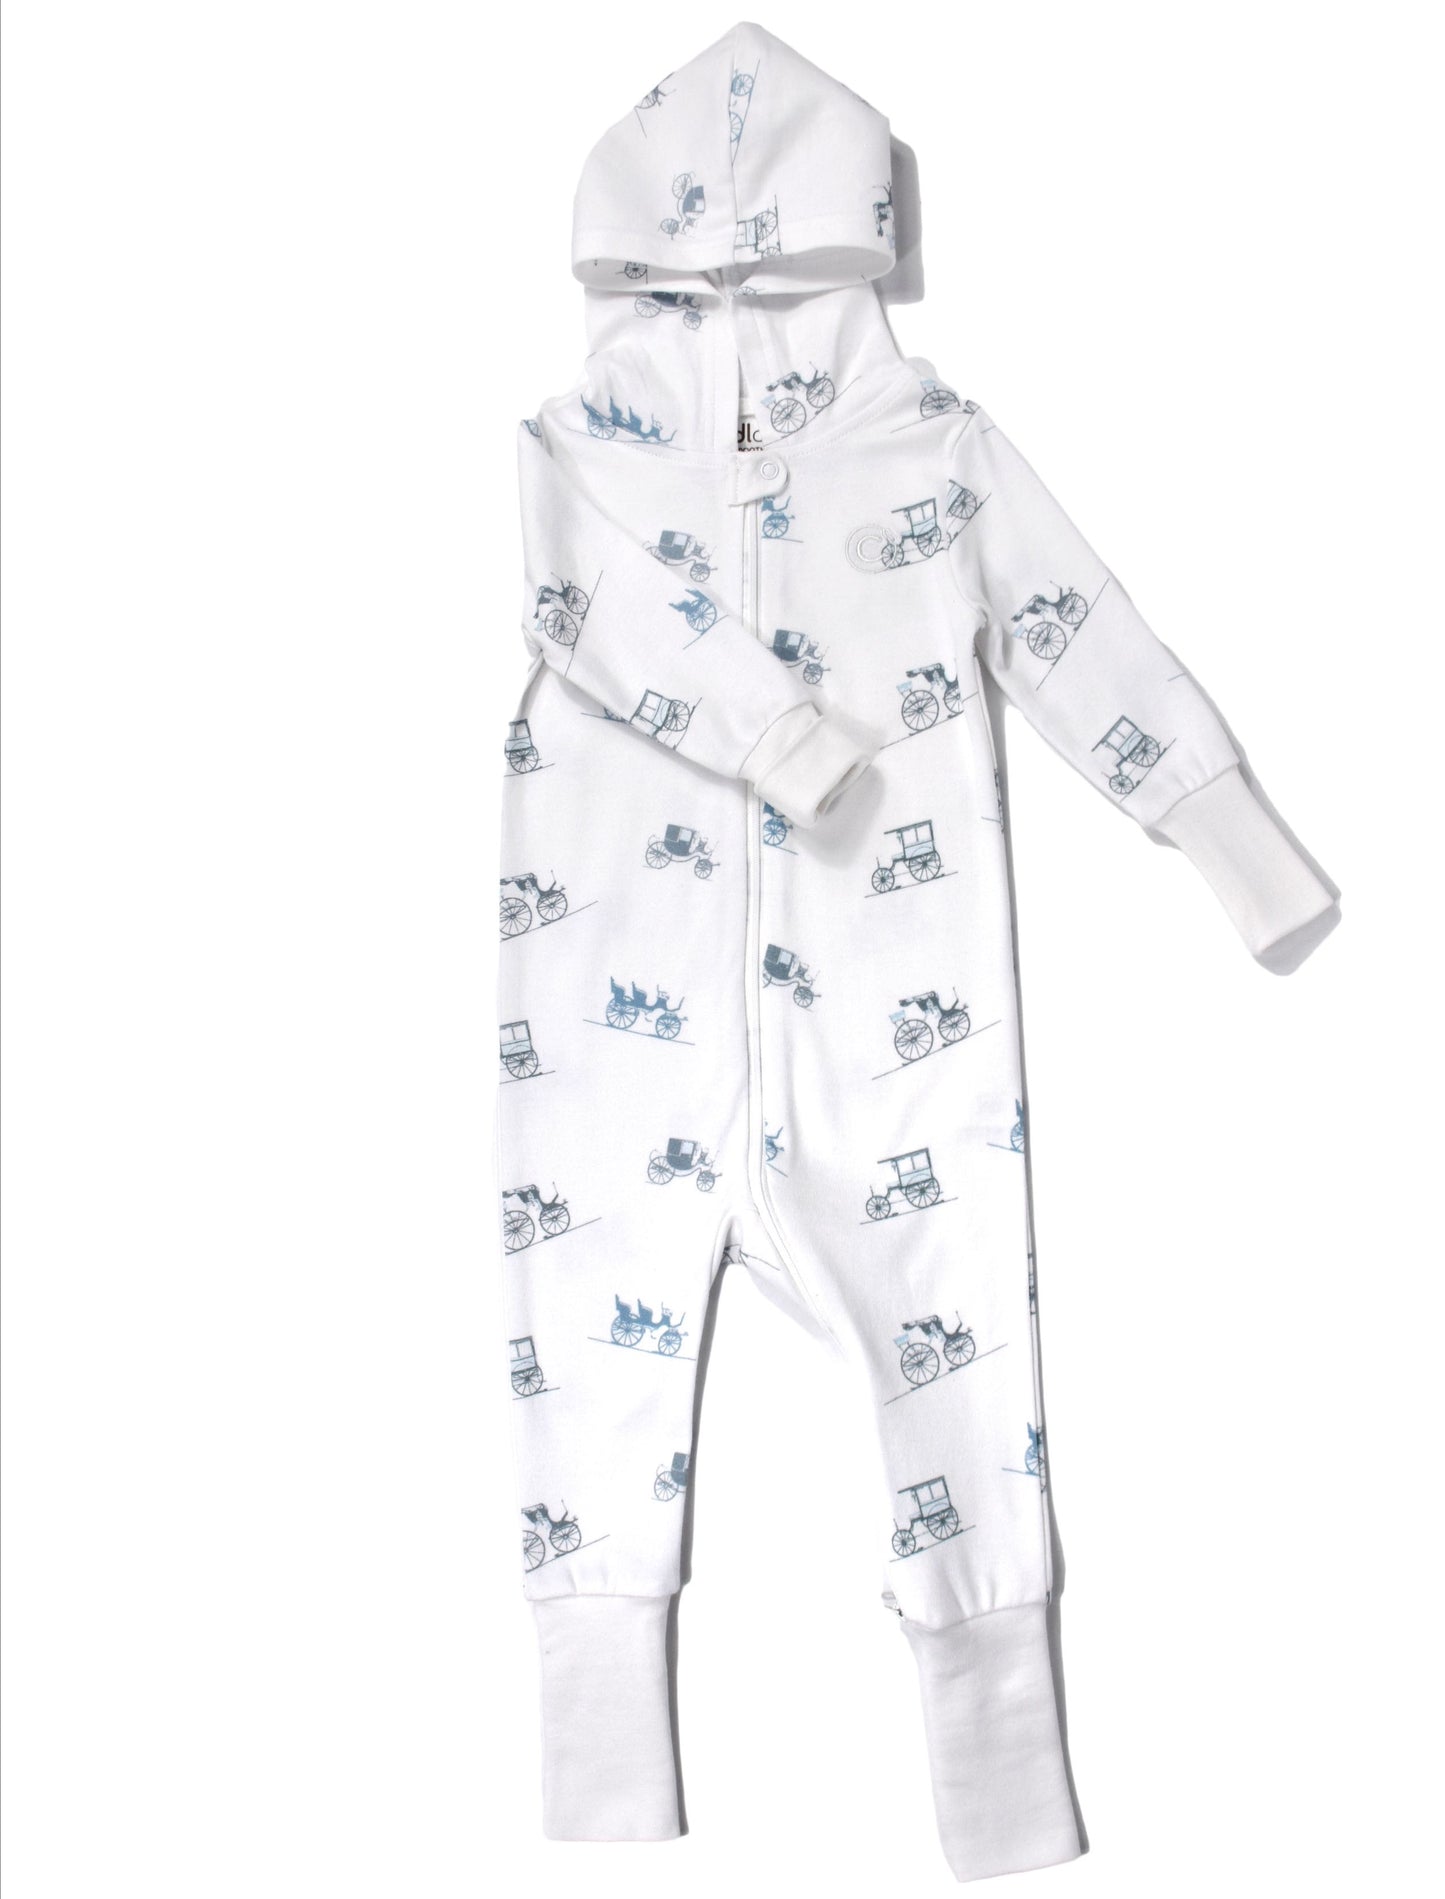 Shop Grow-on Romper with Hood